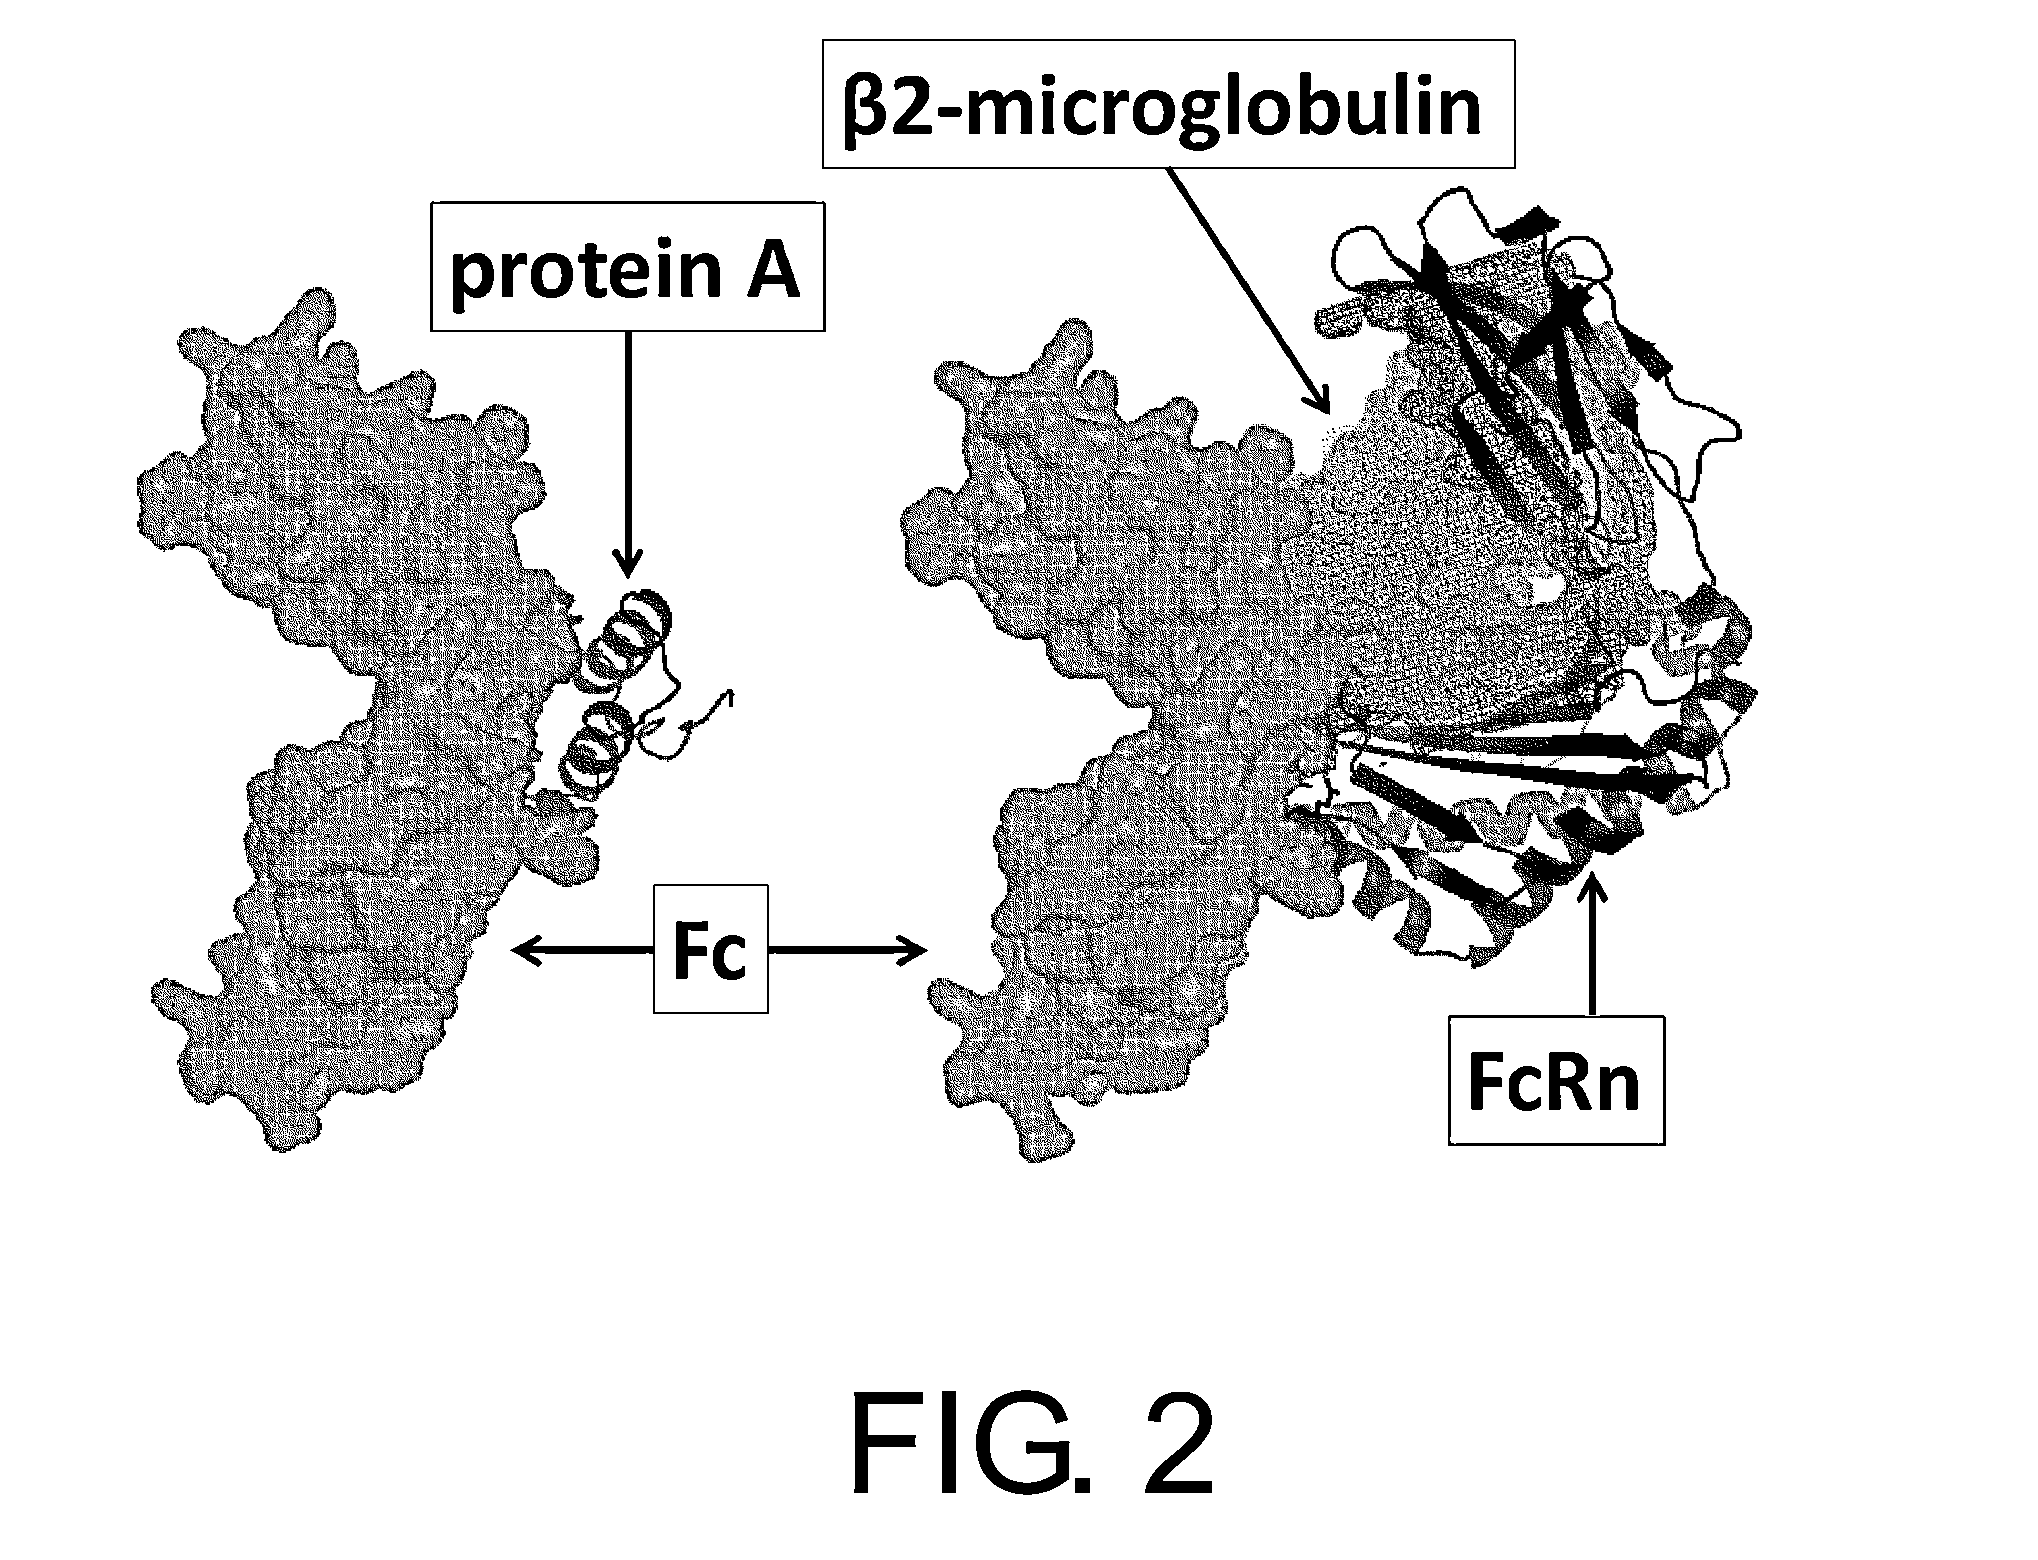 Polypeptide modification method for purifying polypeptide multimers